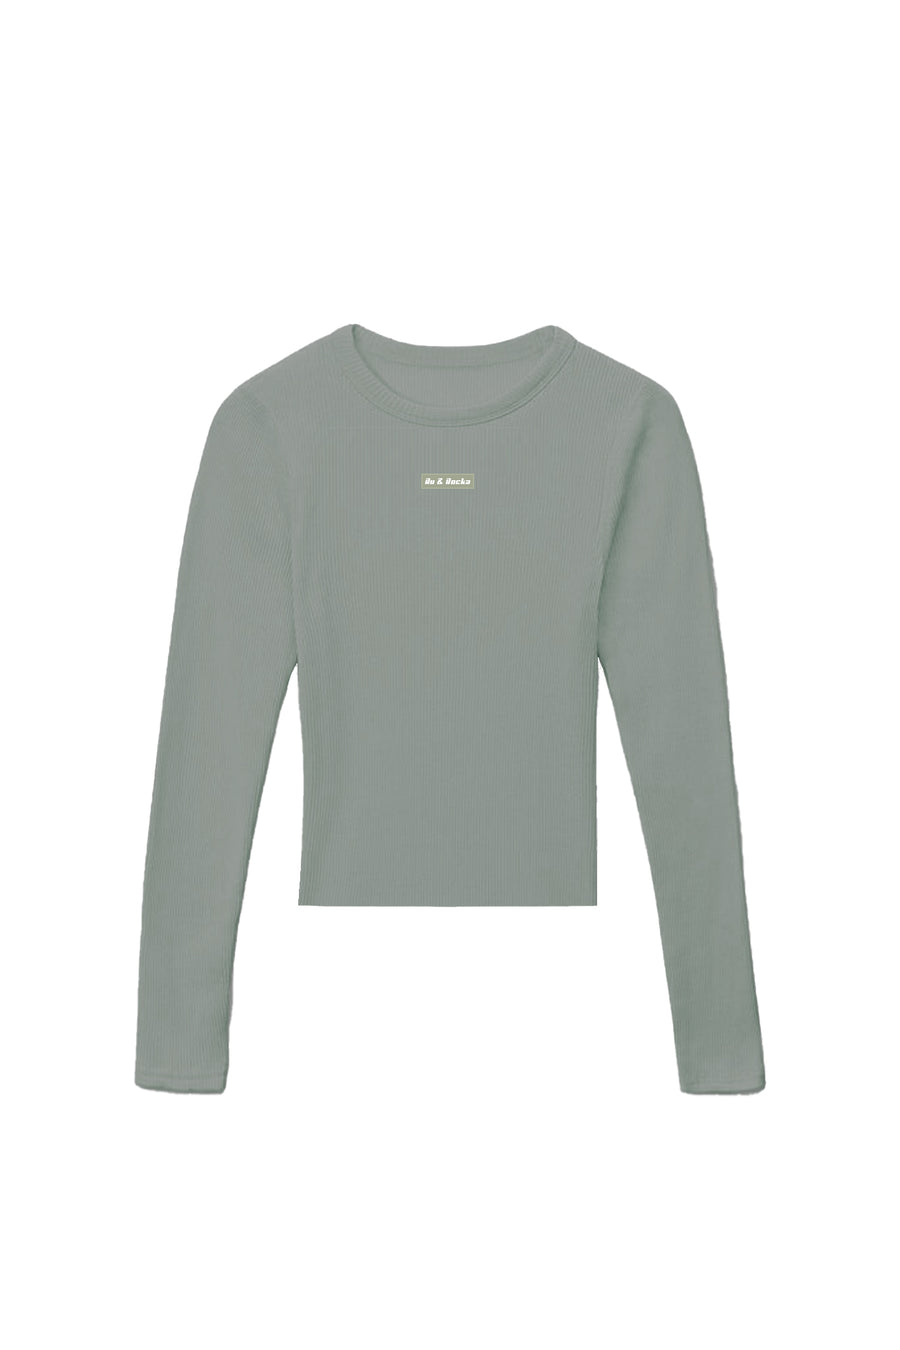 Sage Long Sleeve Ribbed Cotton Top